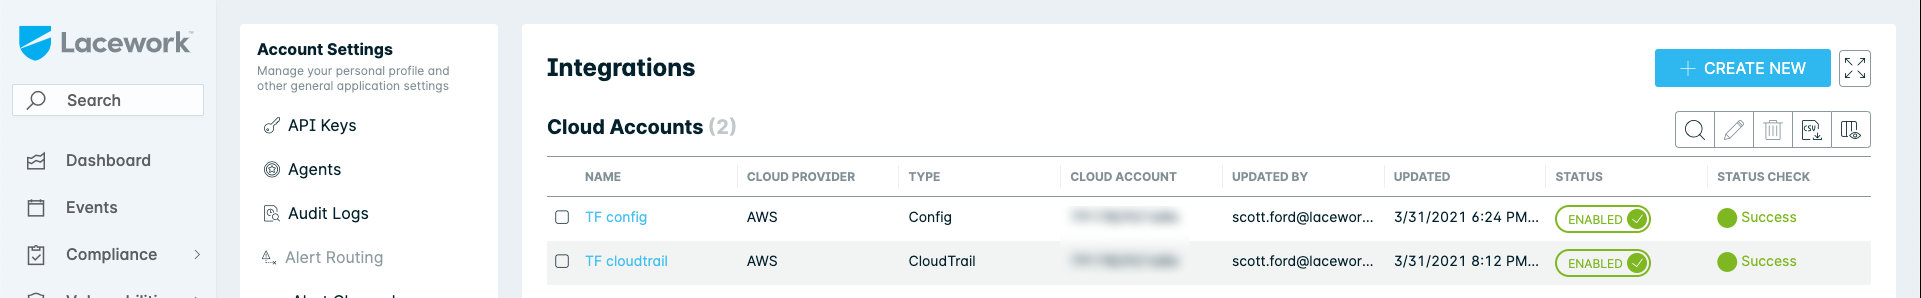 An image showing an AWS Config and CloudTrailintegration in the Lacework Console